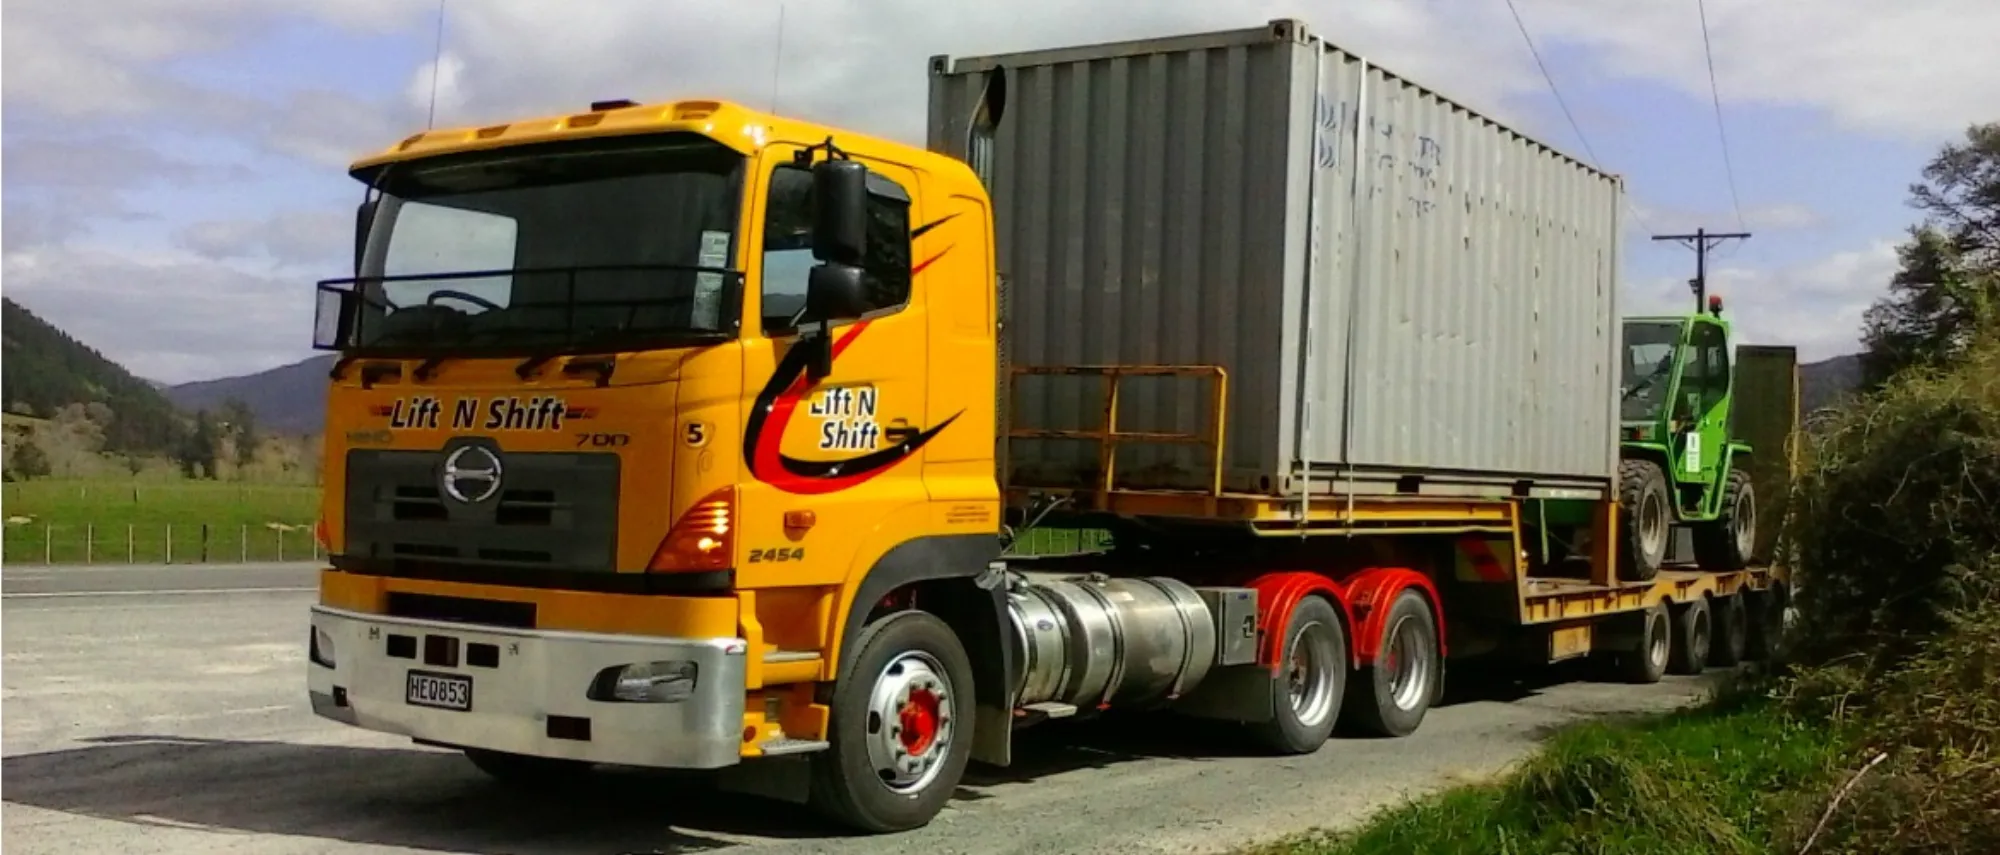 Lift N Shift - is able to transport machinery, buildings, containers of all shapes and sizes.